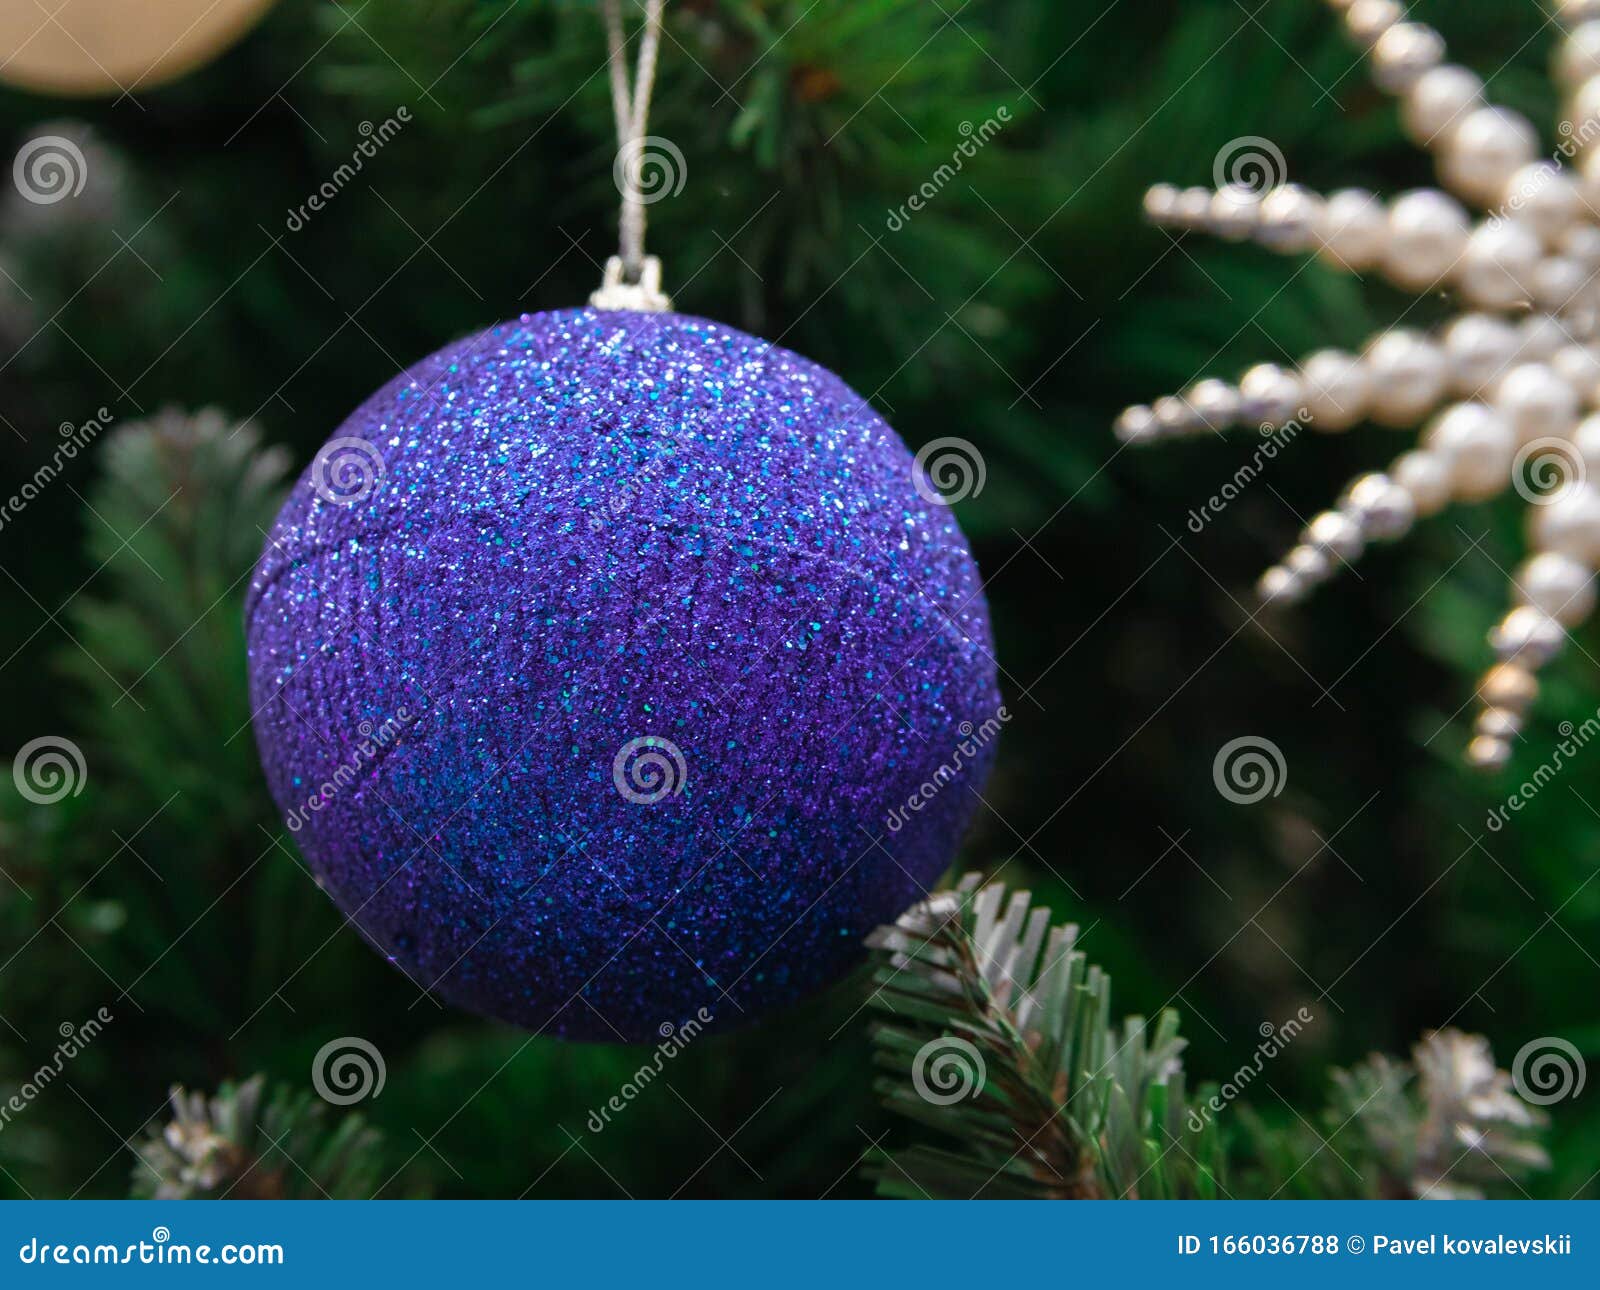 Christmas Dark Blue Shiny Ball Hanging on the Green Branch of the Tree ...